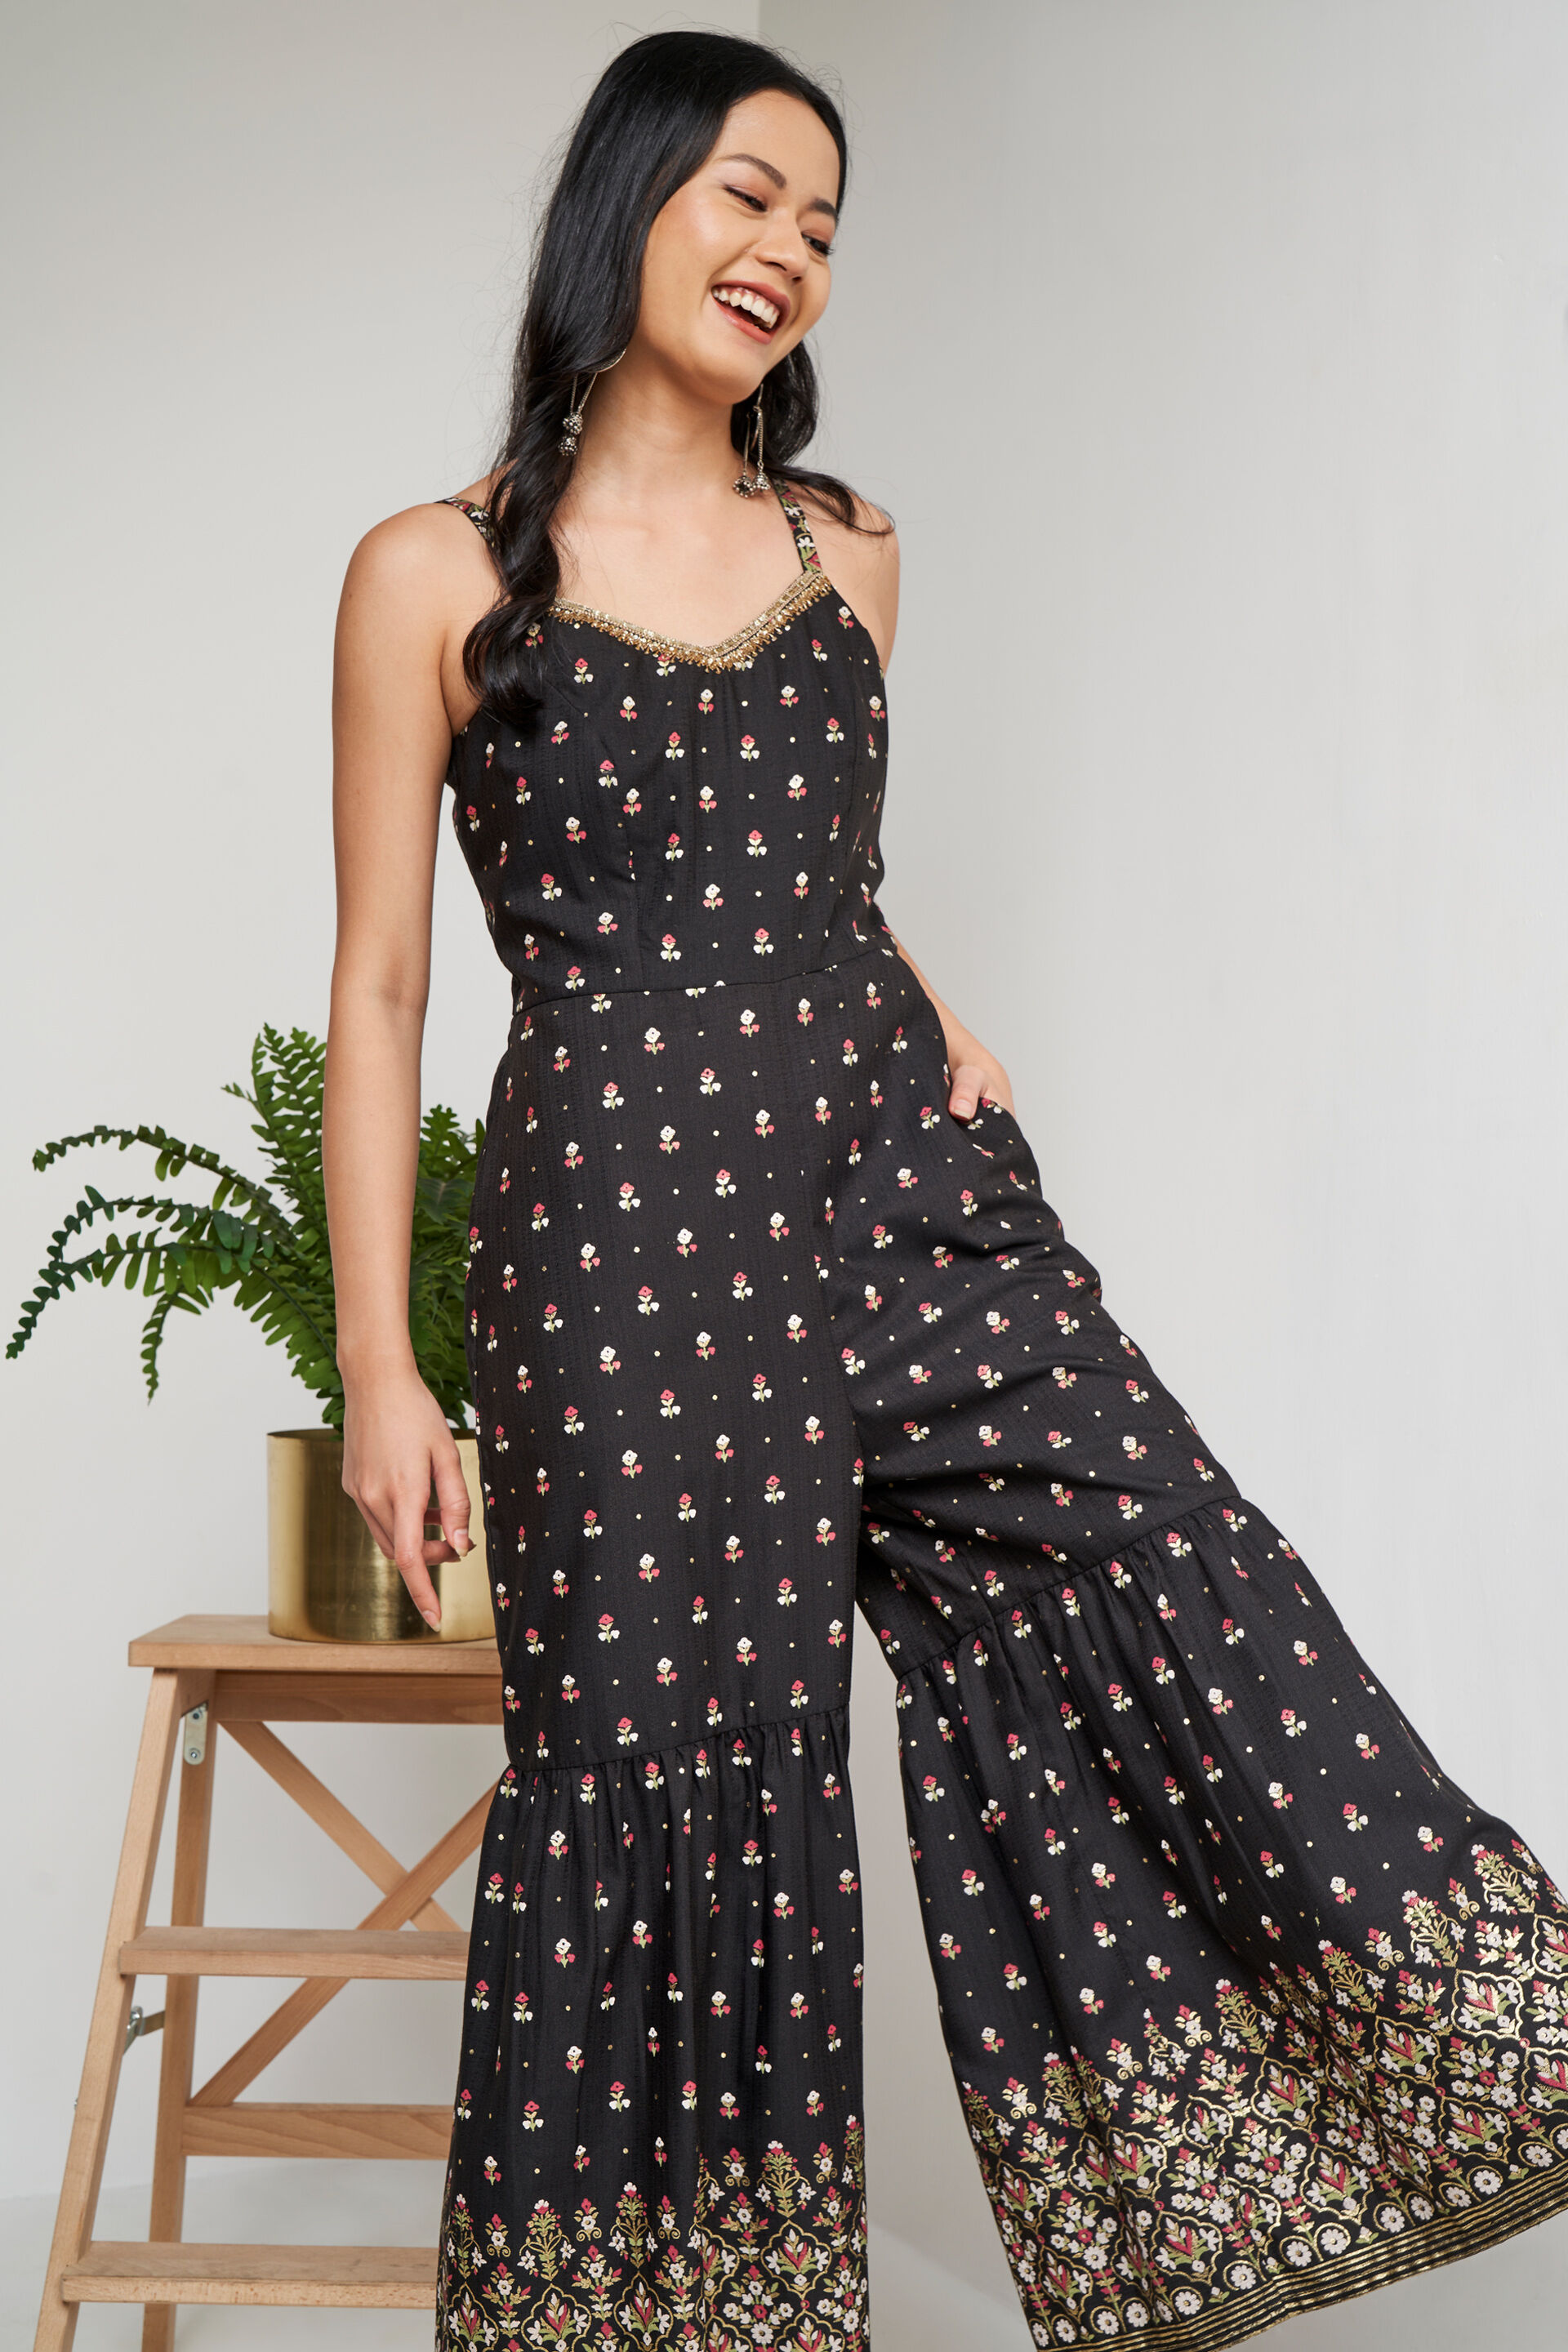 Jumpsuits & Co-ords | Elegant Jump Suit Whih Gives You Classy Look  😍😍😍😍😍 | Freeup